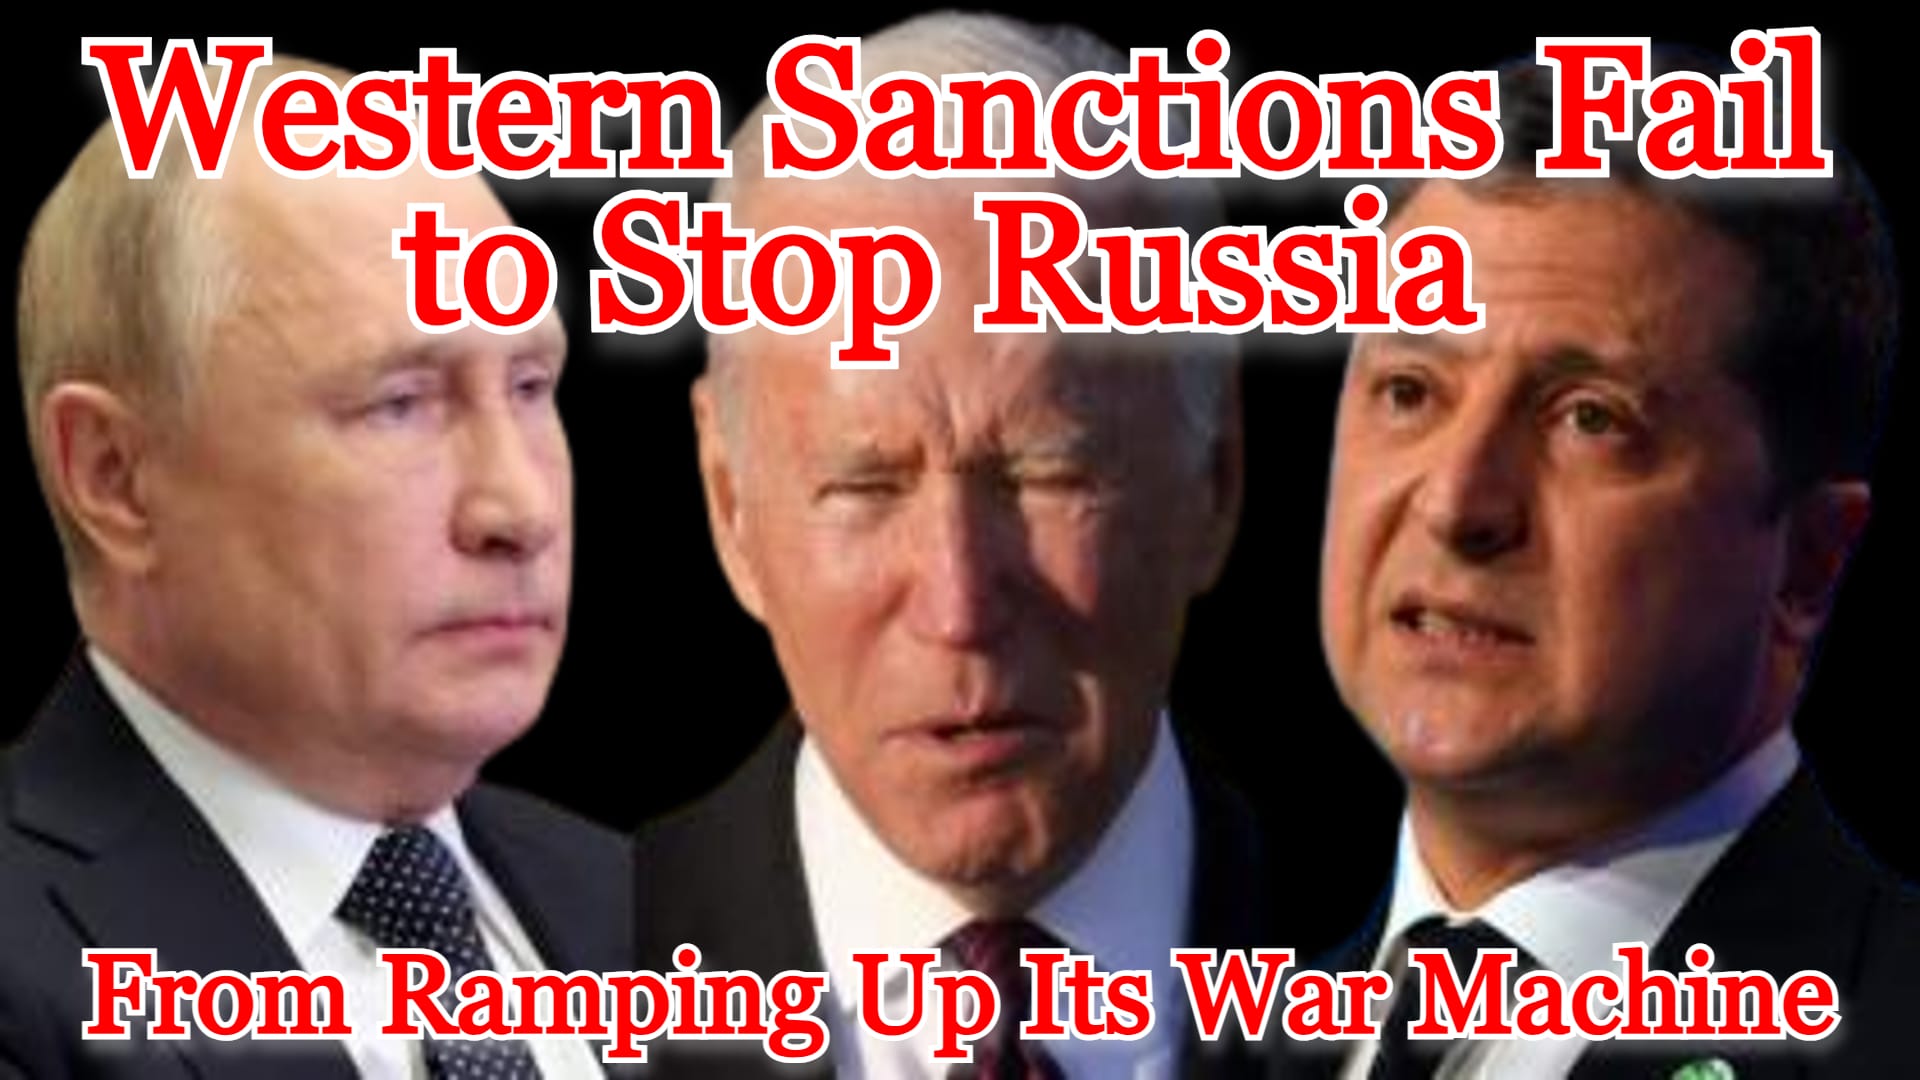 COI #472: Western Sanctions Fail to Stop Russia from Ramping Up Its War Machine